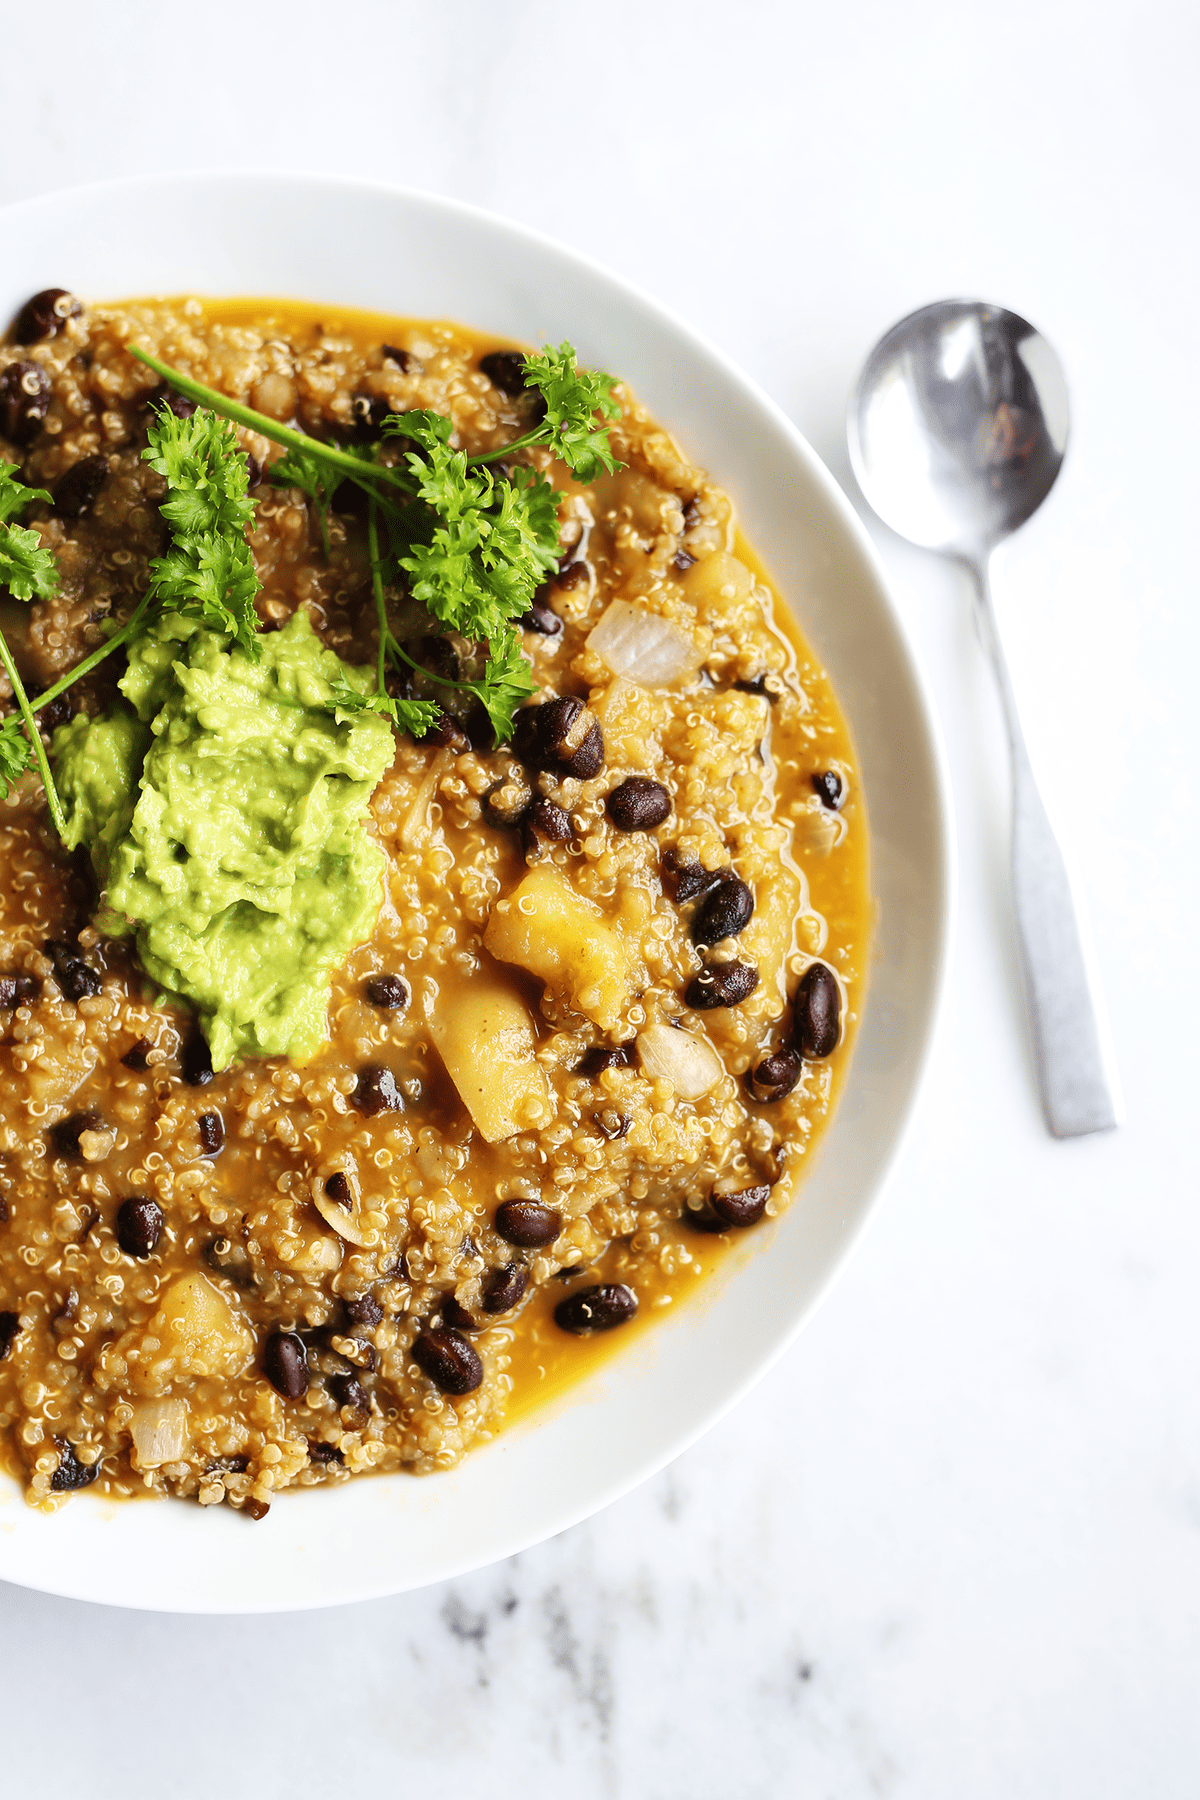 This homemade Black Bean Quinoa Soup is easy and only requires 1 pot, healthy, packed full of fresh earthy, hearty flavors and texture. Vegan and gluten free.